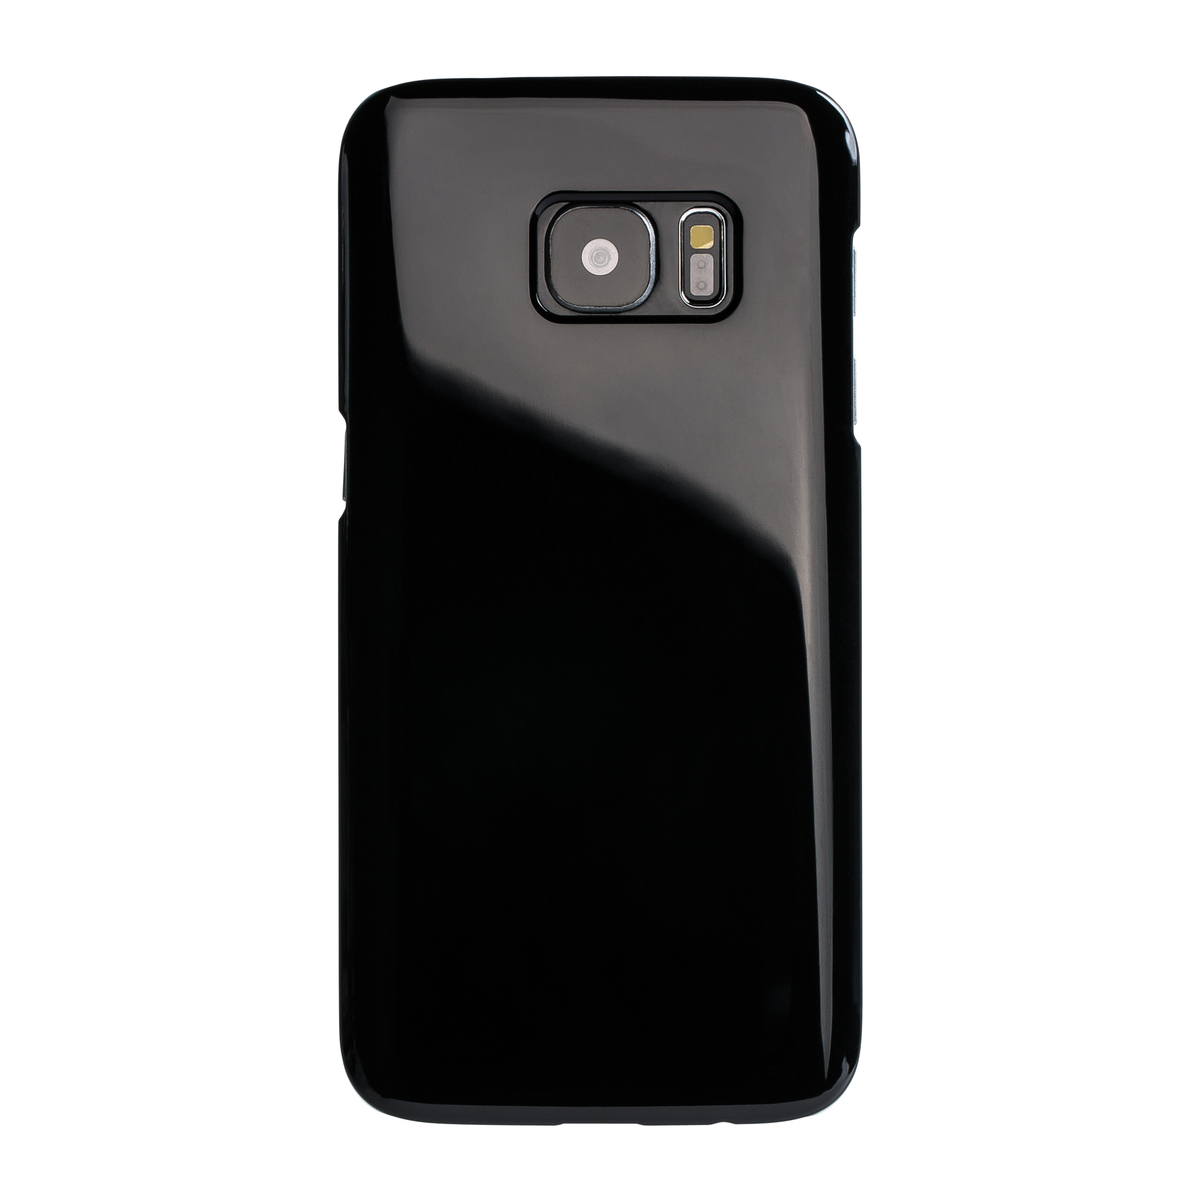 LM Smartphonecover REFLECTS-COVER XIII Samsung Galaxy S7 BLACK schwarz